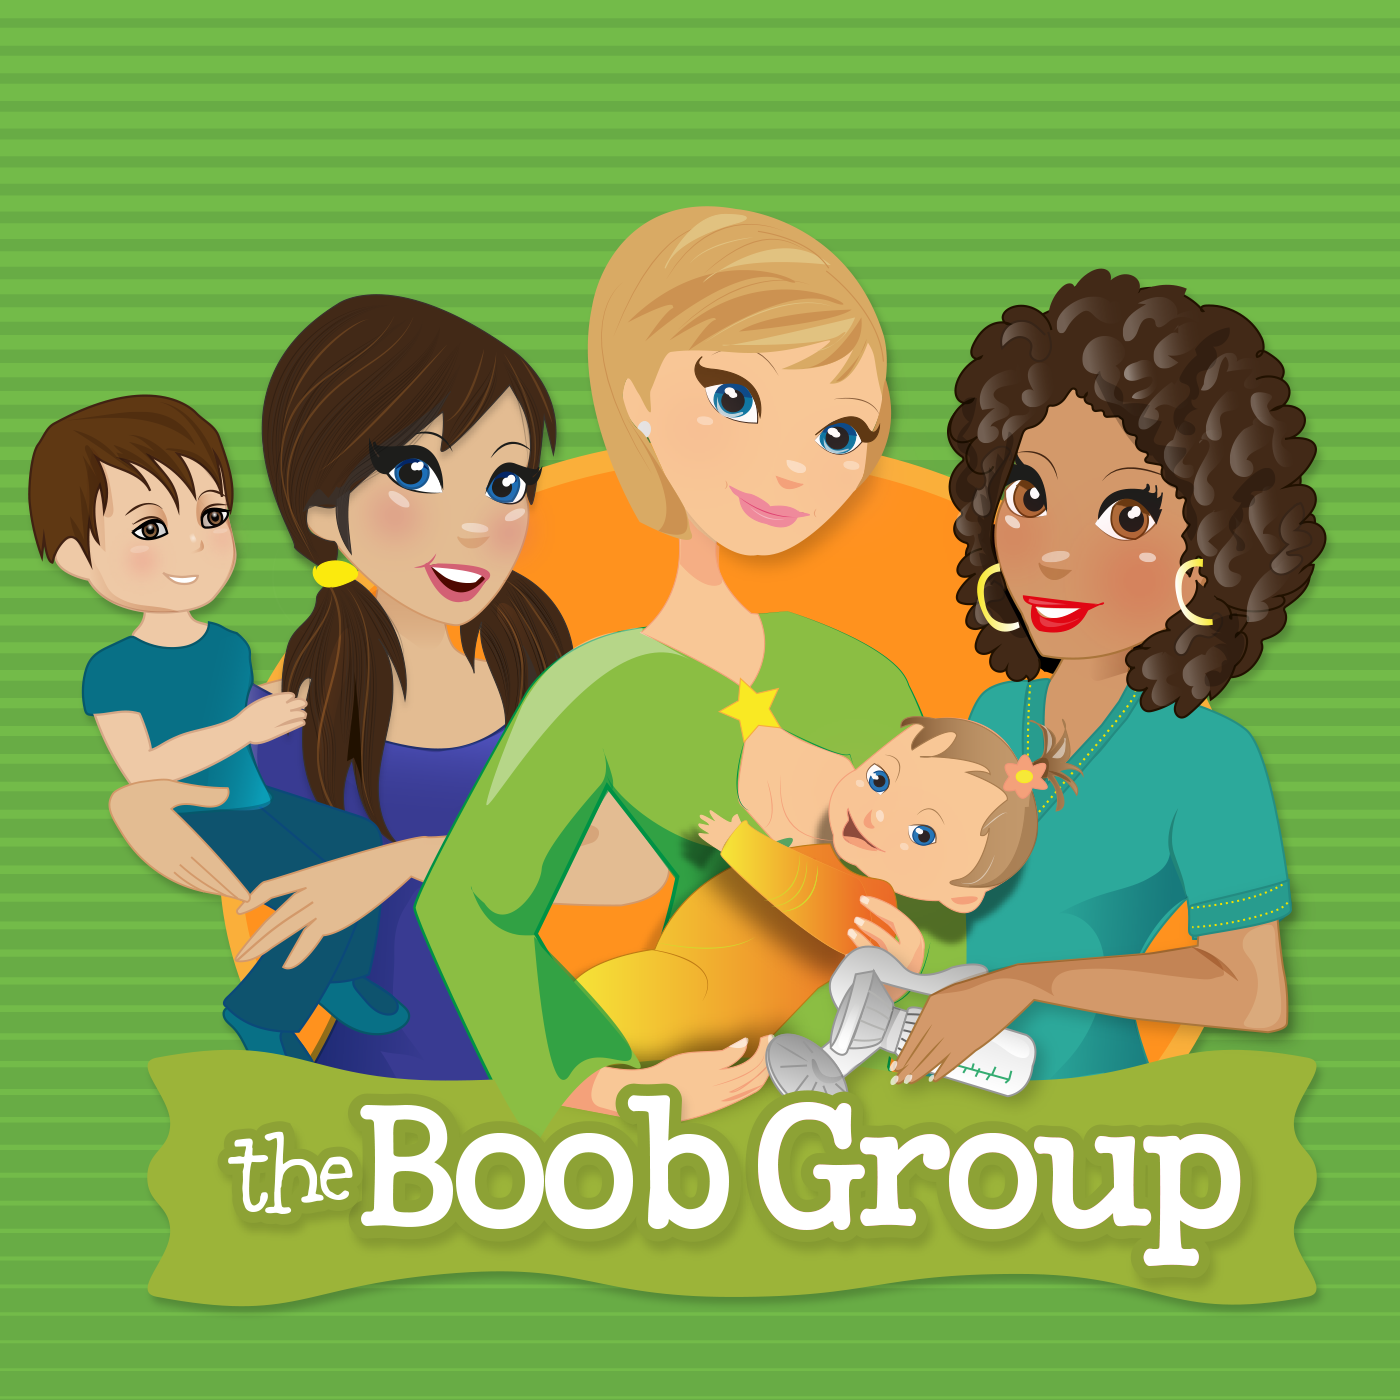 The Boob Group photo photo picture